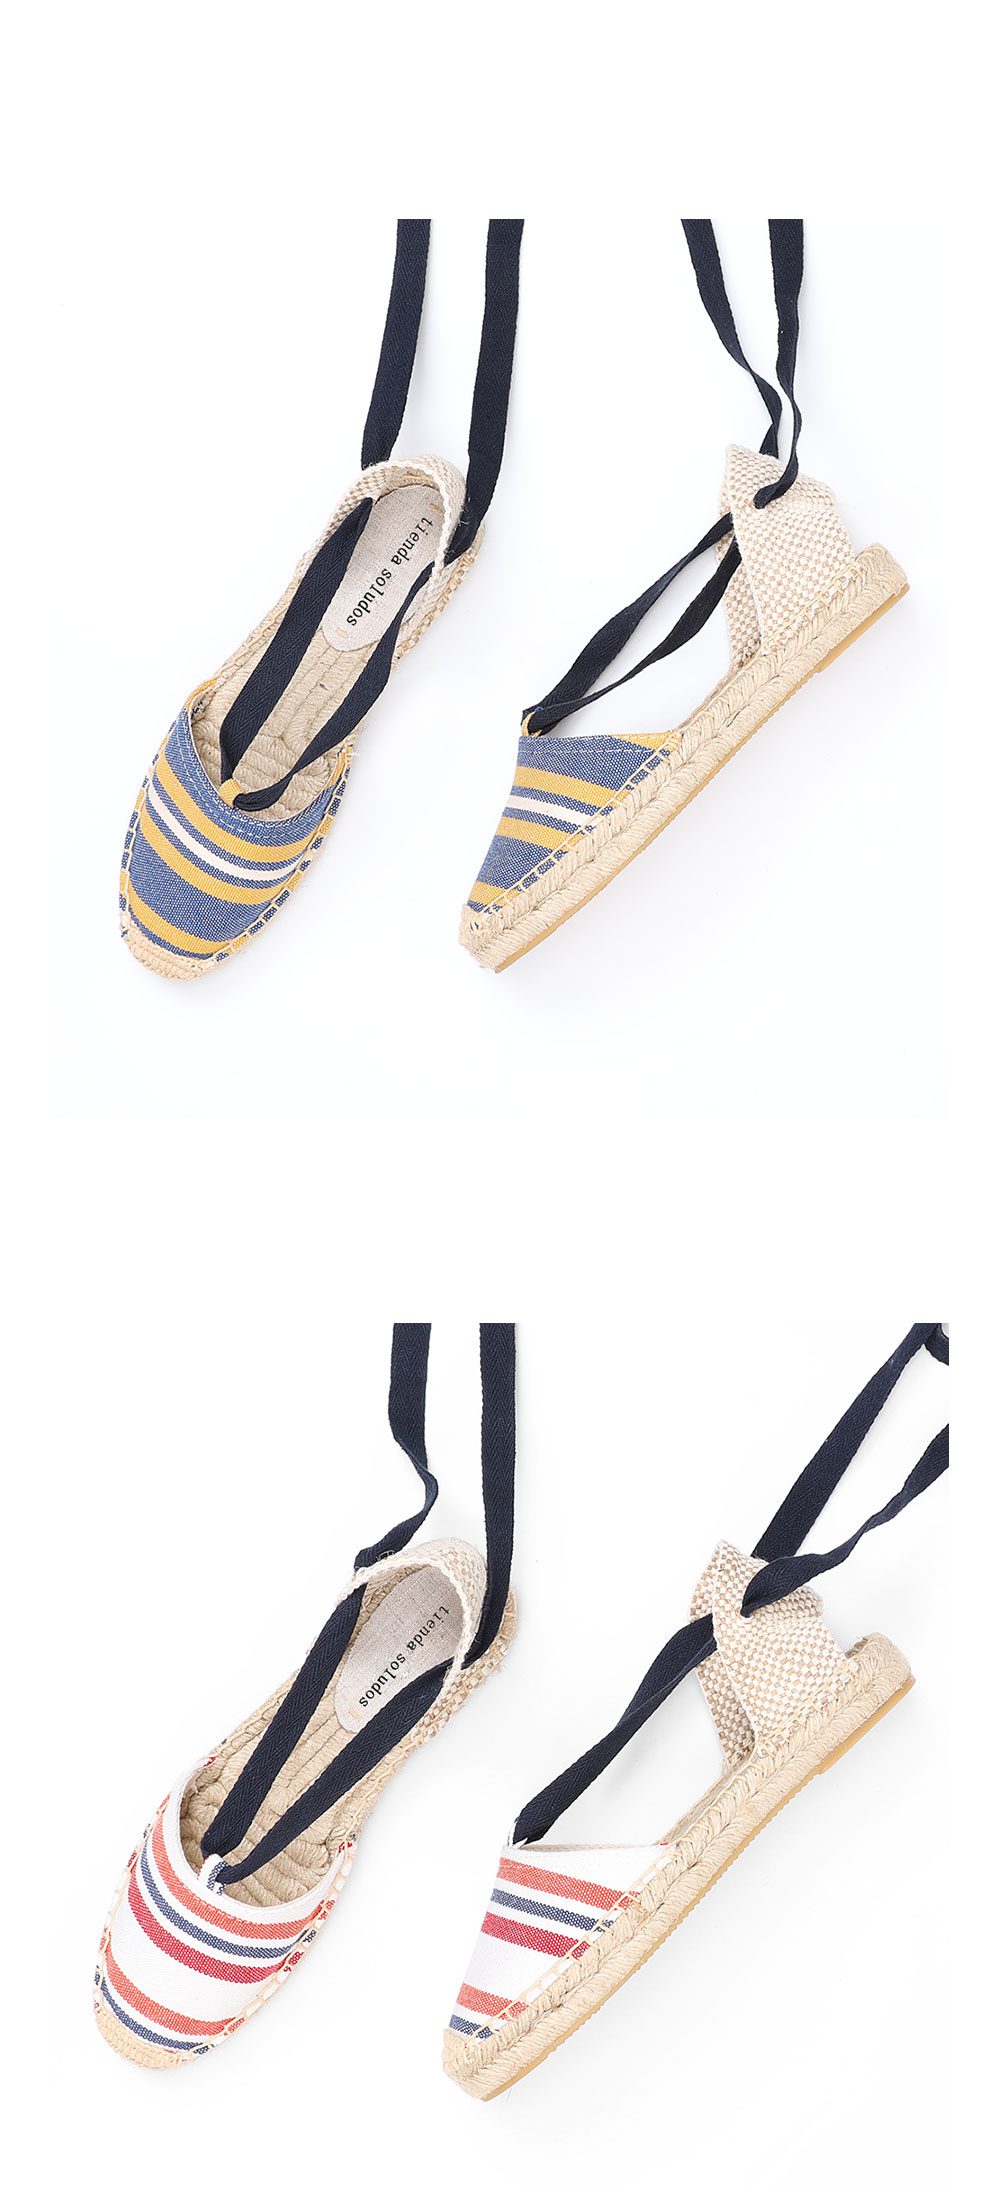 2021 Hot Sale Promotion Cotton Fabric Flat With Open Sapato Feminino Sandals Sandalias Mujer Womens Espadrilles Shoes